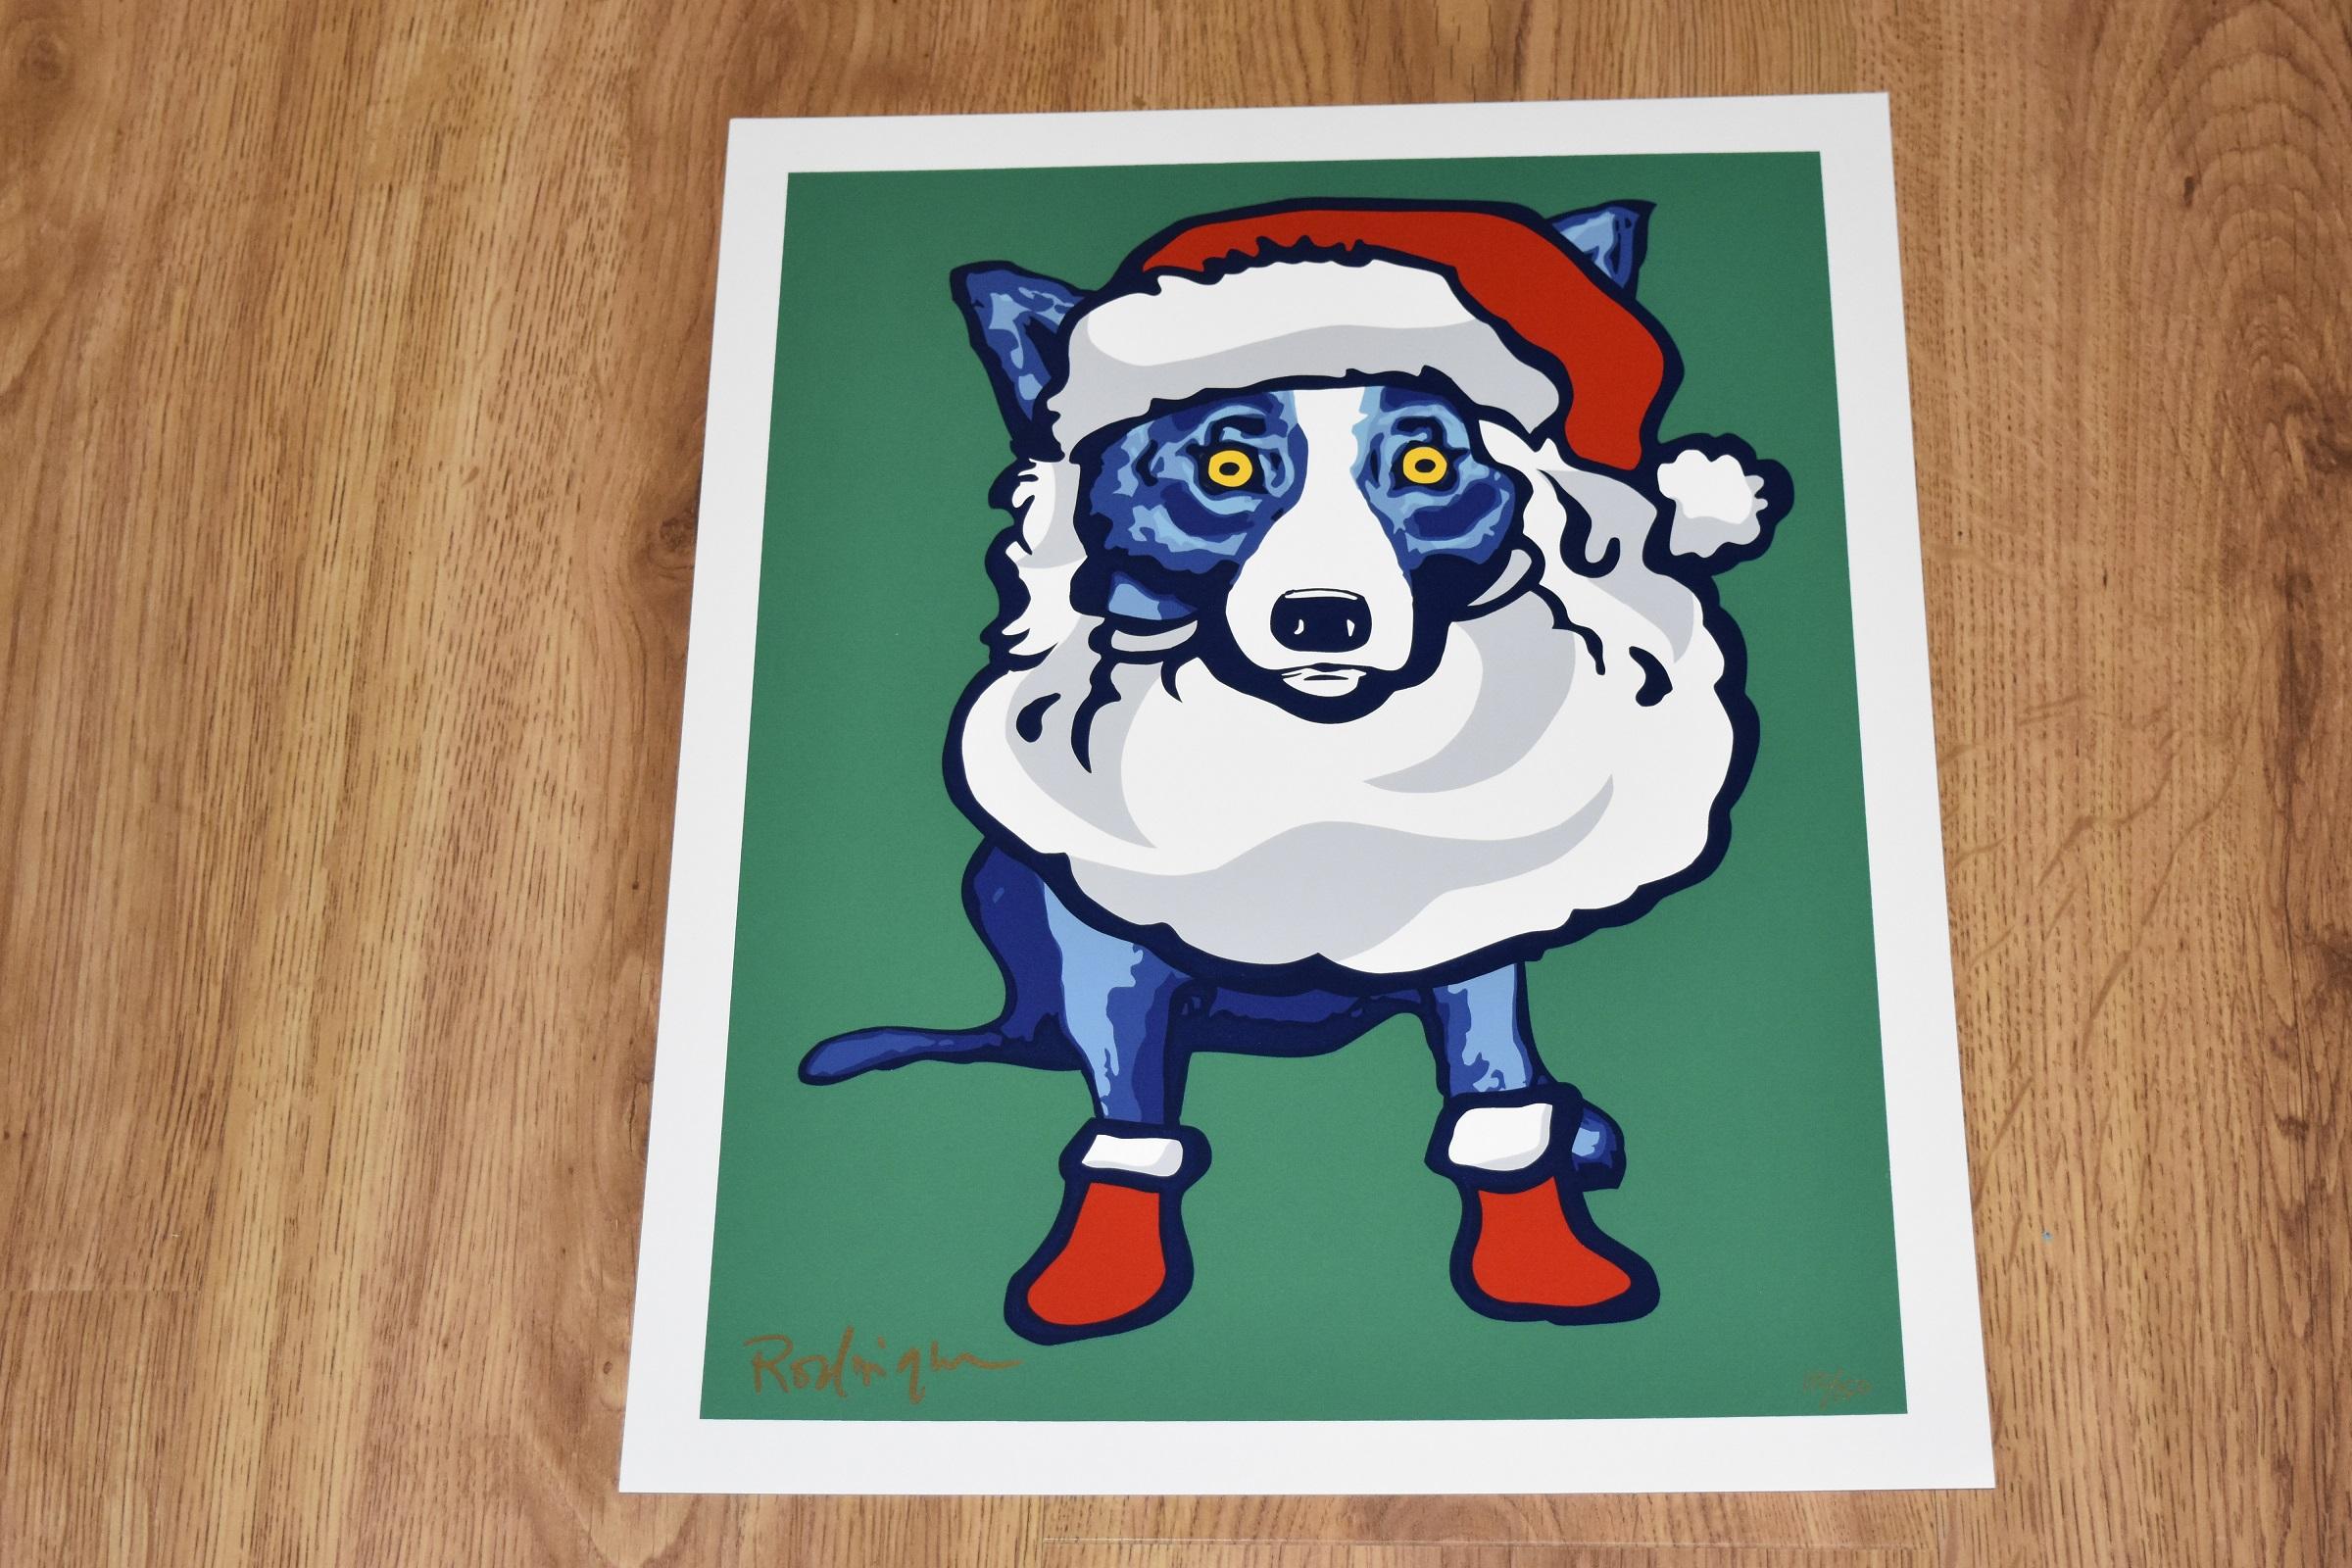 This Blue Dog work consists of a dog wearing a Santa red and white hat and booties, donning a white Santa beard and strands of white hair on a green background.  The dog has soulful yellow eyes.  This pop art animal original silkscreen print on